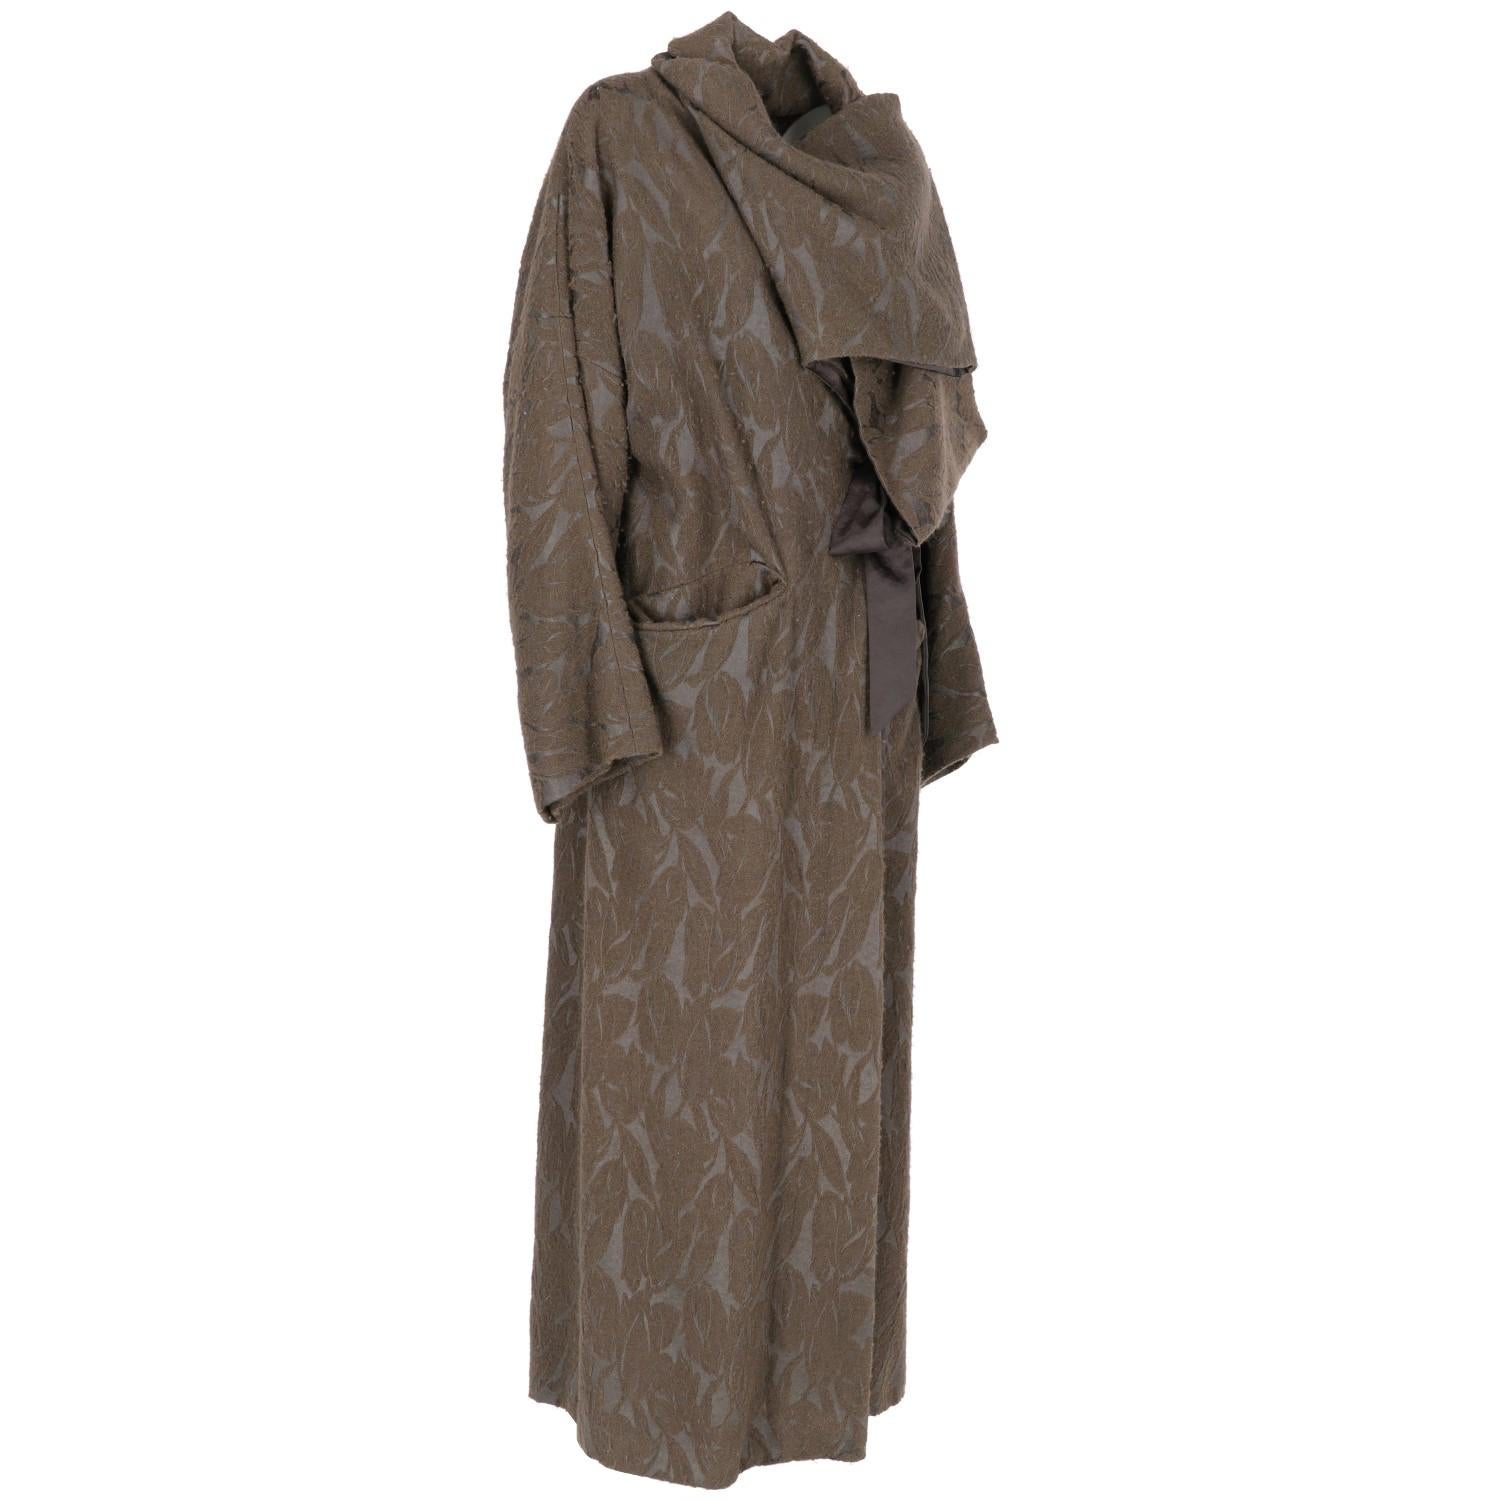 The Antonio Marras long brown jacquard wool coat with grey satin inner inserts features one wrap collar, waistband and single-buttoned front closure and two fancy cut front pockets. The lining is in grey flower and stripes pattern jacquard satin.